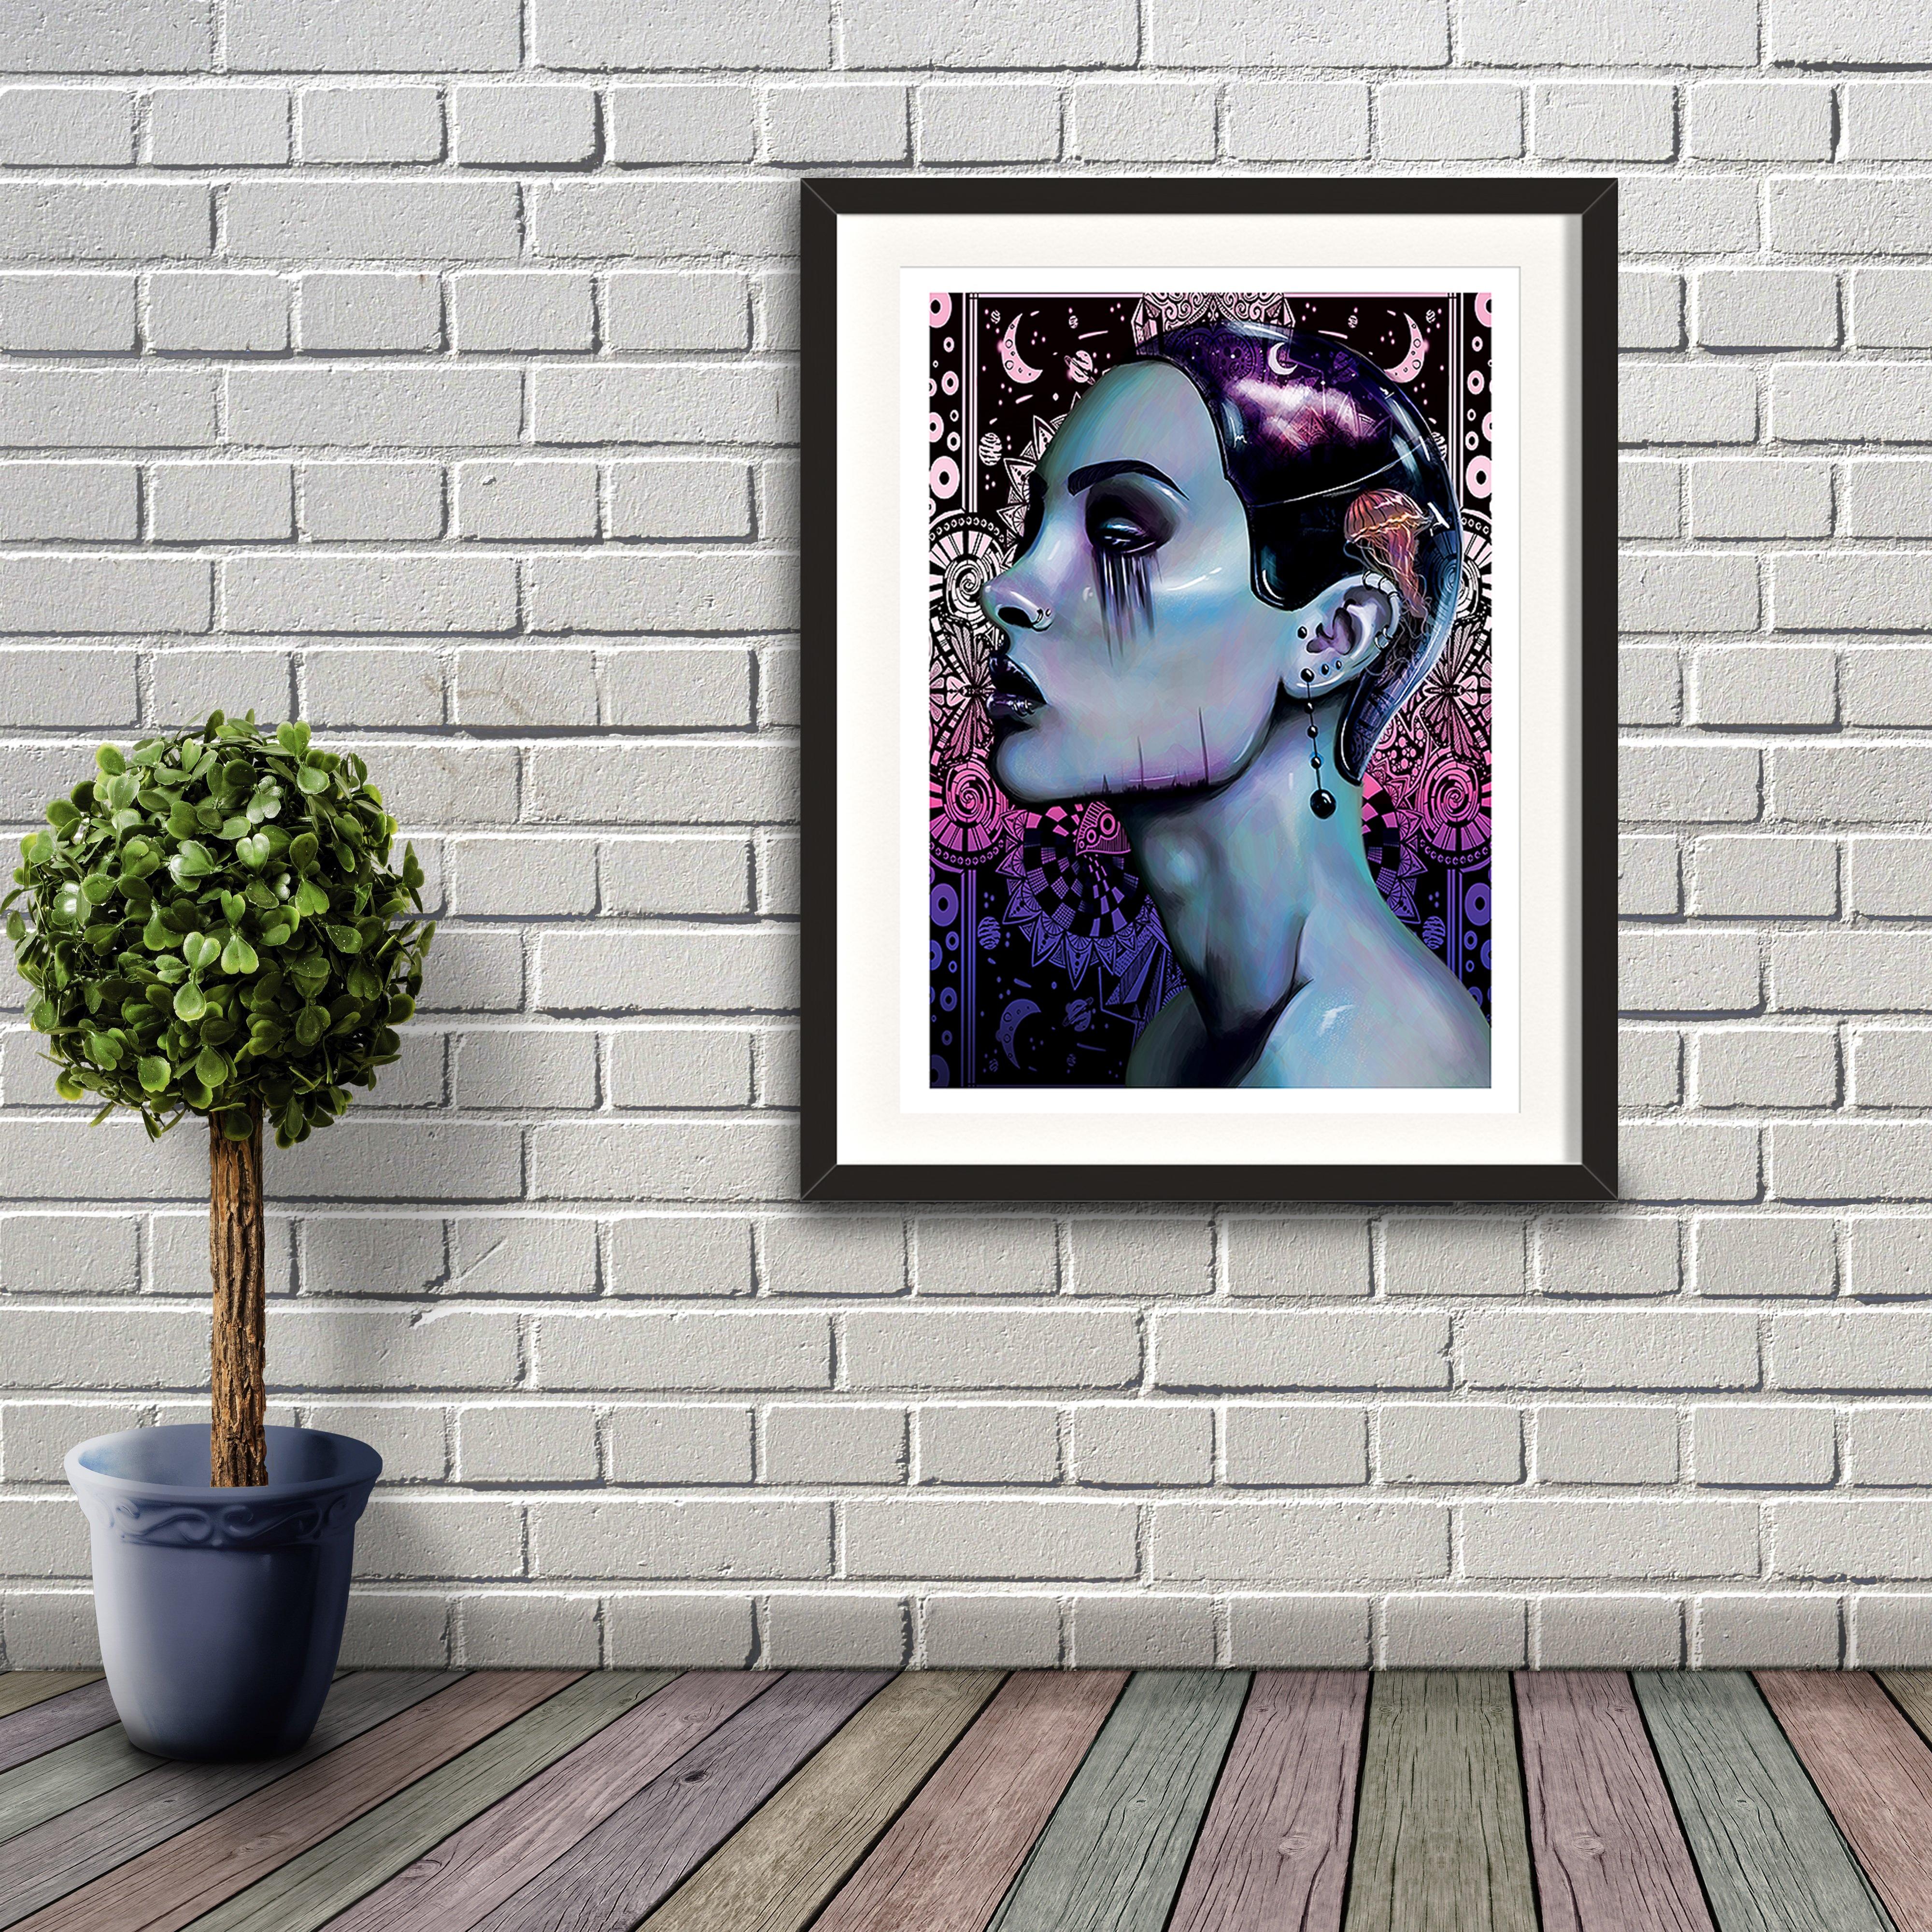 A digital painting called Depth by Lily Bourne a lilac image of a lady with a stenciled background. The lady wears a a tight skull cap with a jelly fish on it. The lady has artisitc makeup. Artwork shown in a black frame on a brick wall.